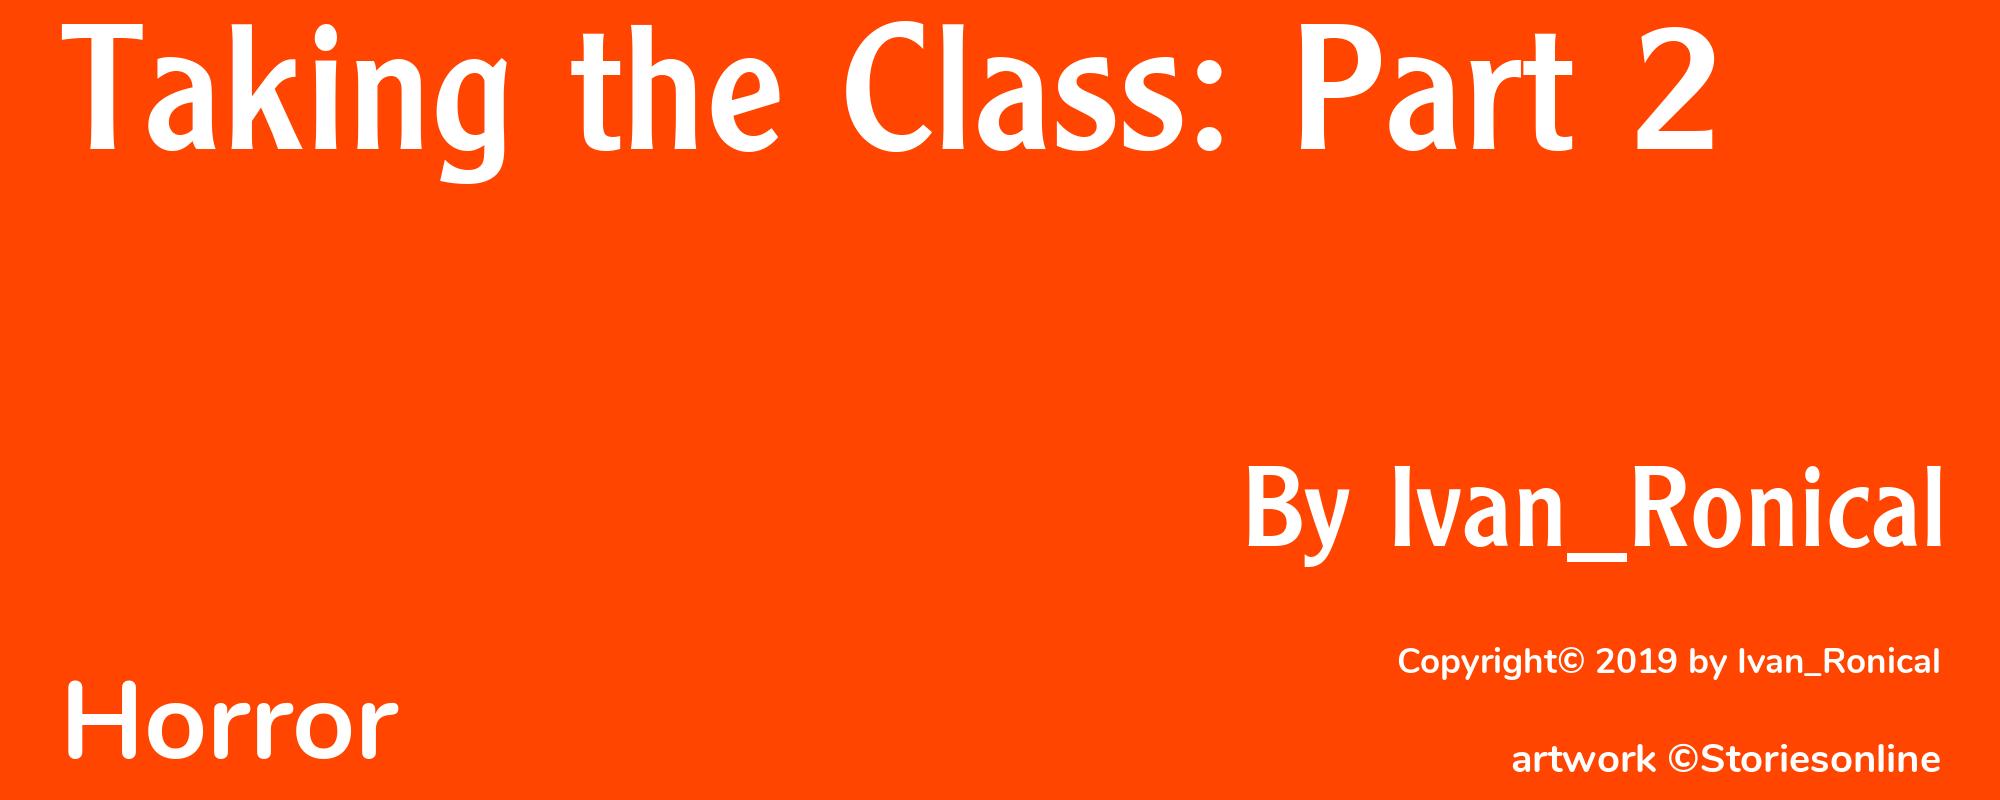 Taking the Class: Part 2 - Cover